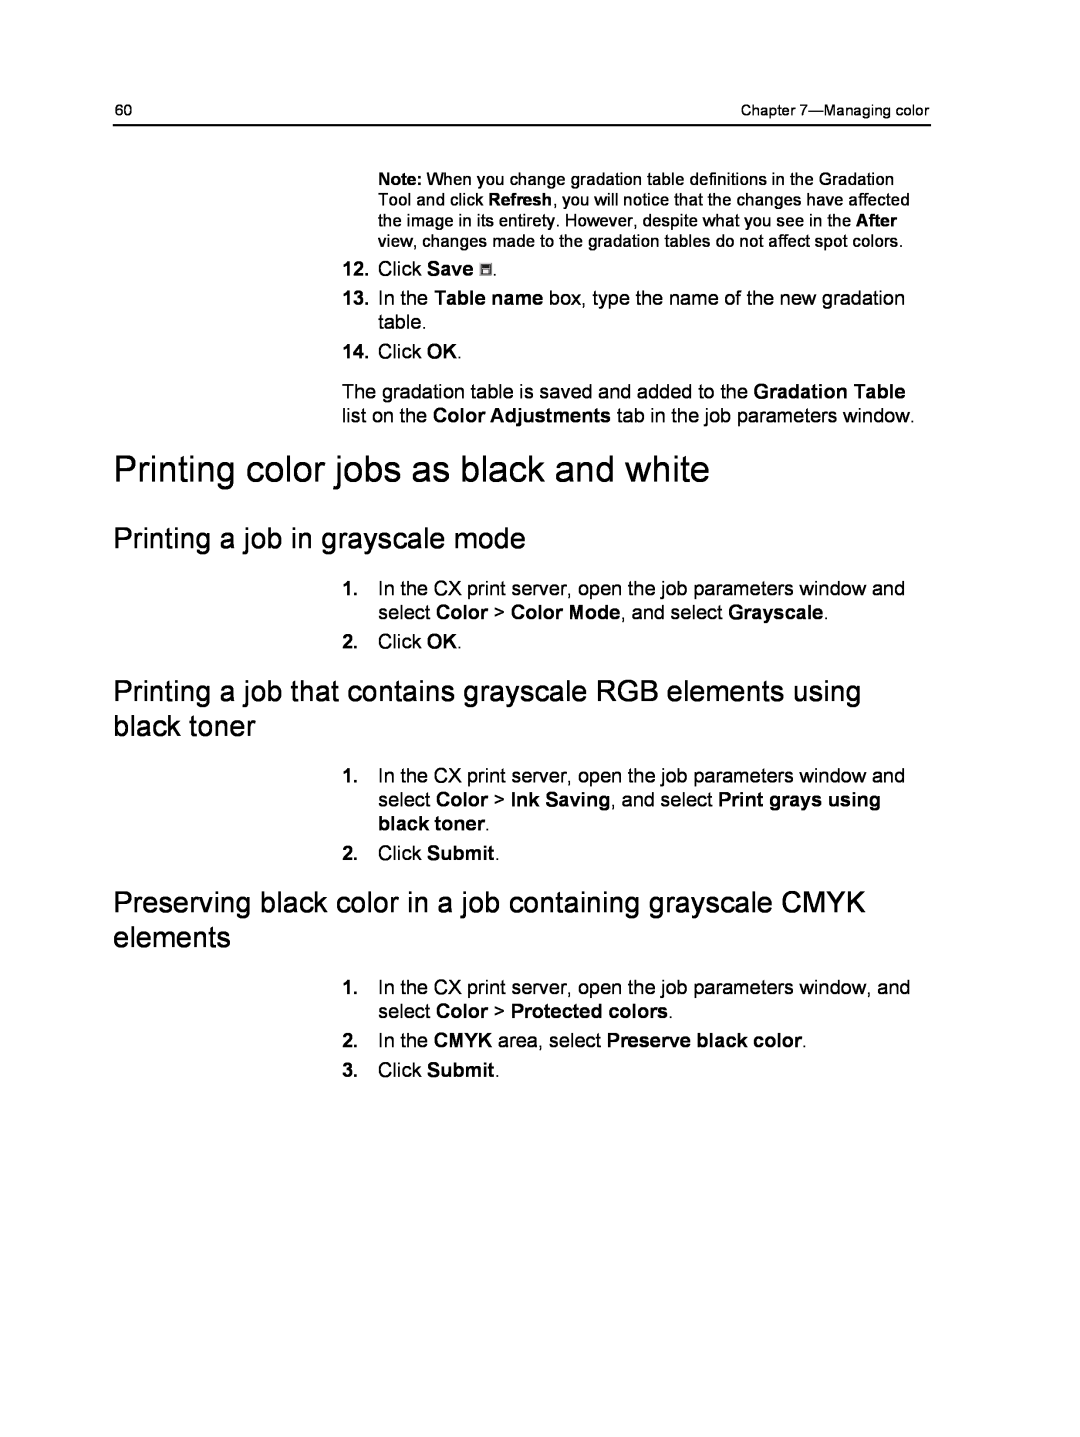 Xerox 560, 550 manual Printing color jobs as black and white 